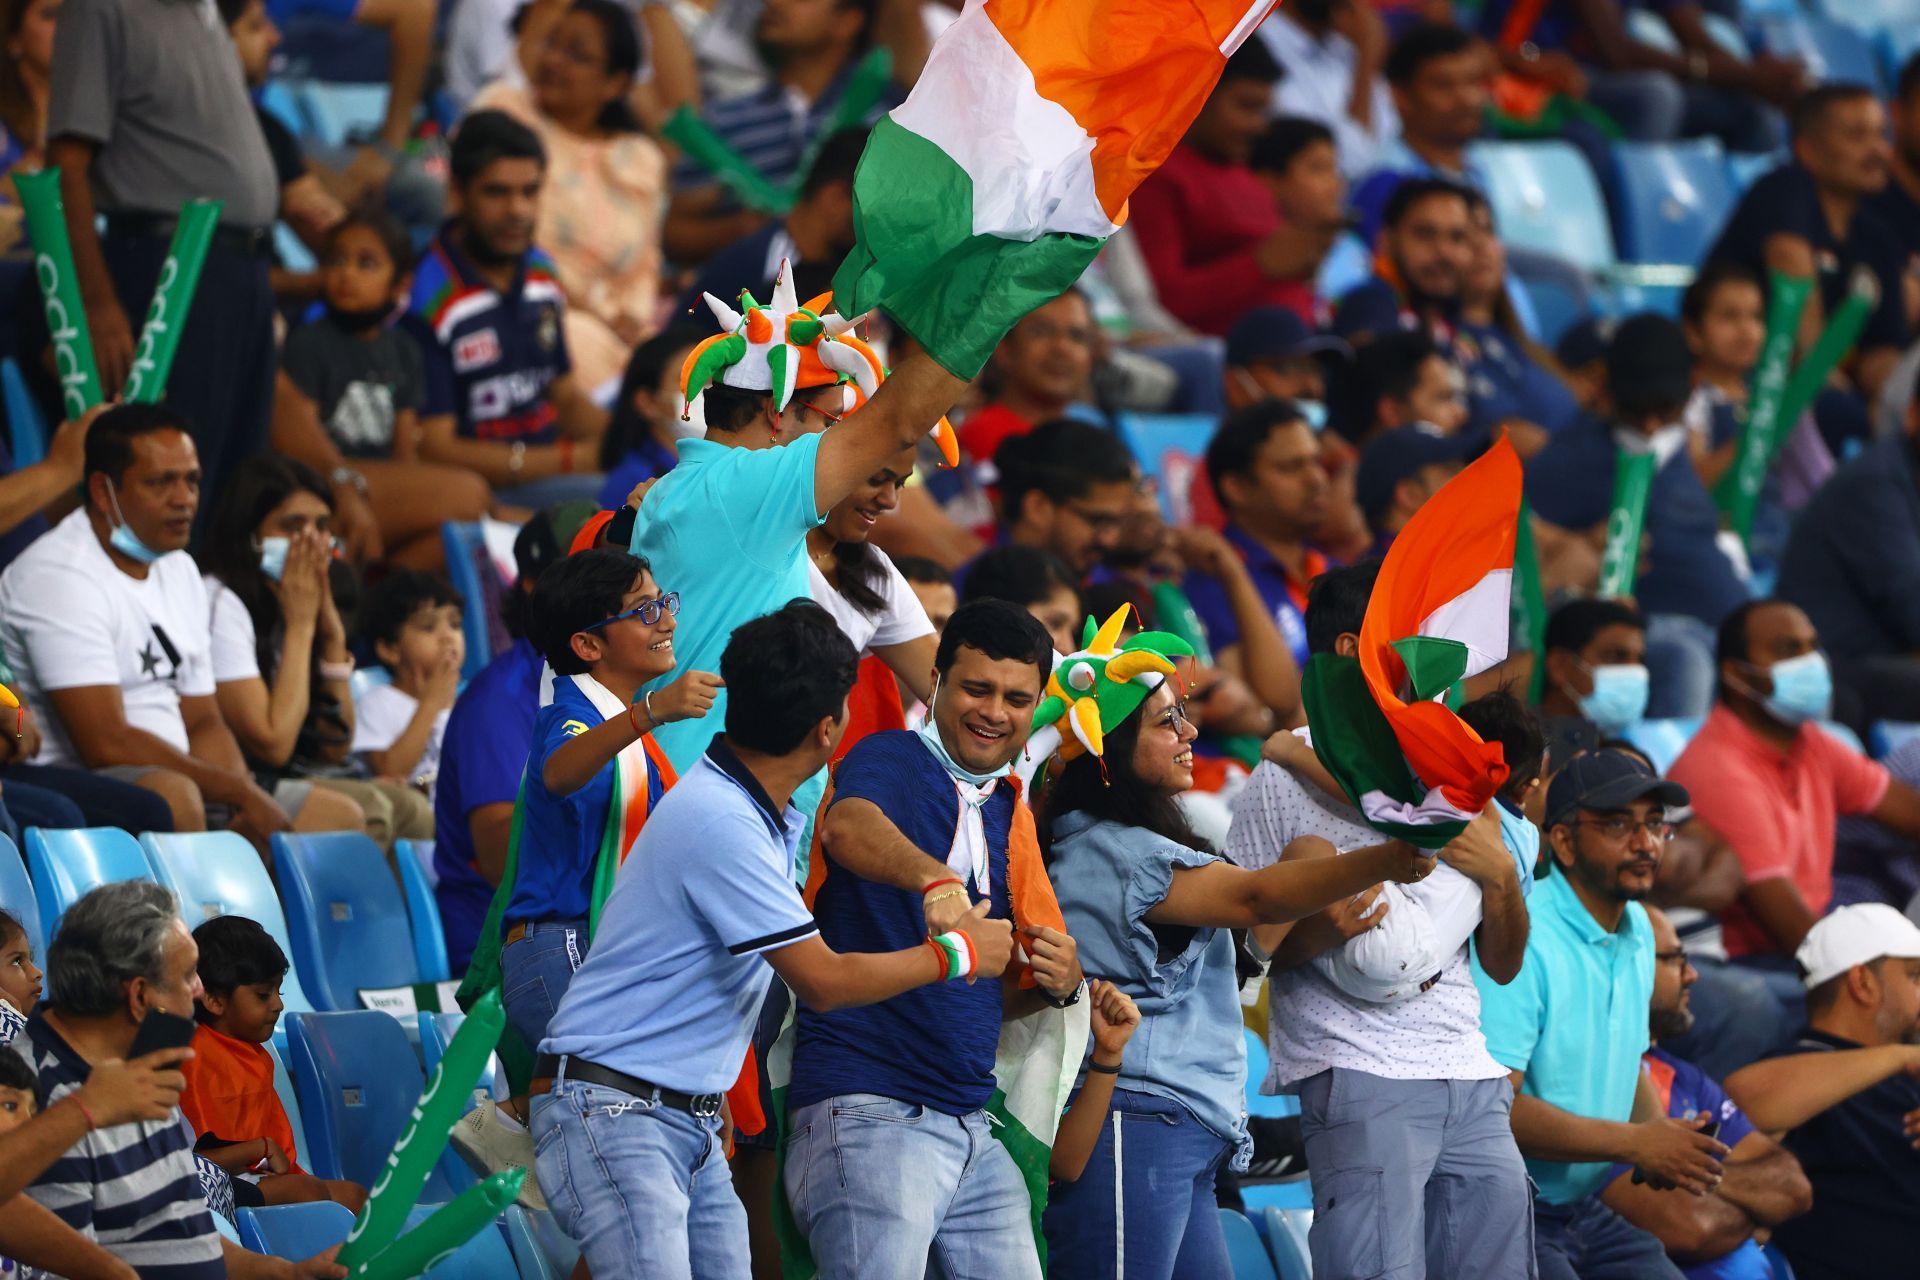 Fans need to follow the COVID-19 protocols while attending India vs New Zealand matches